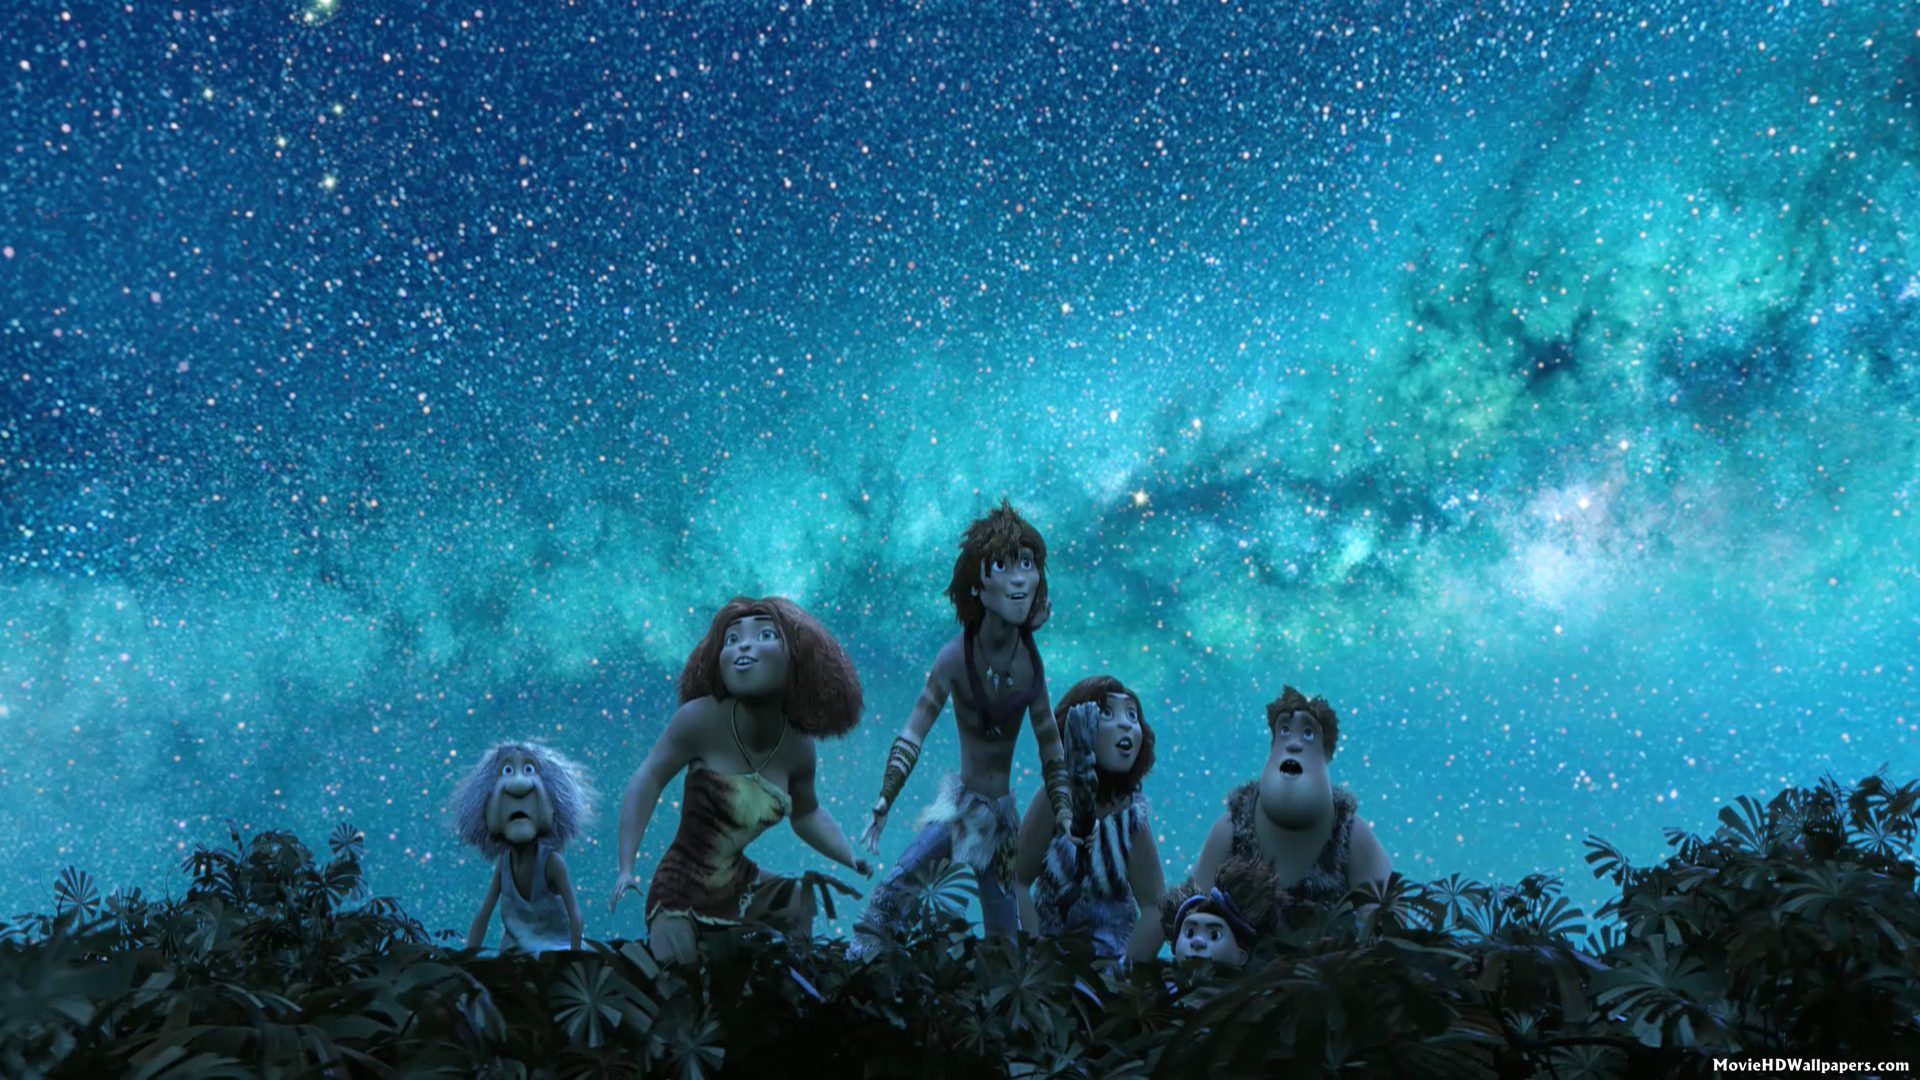 The Croods 2 Wallpaper Free The Croods 2 Background